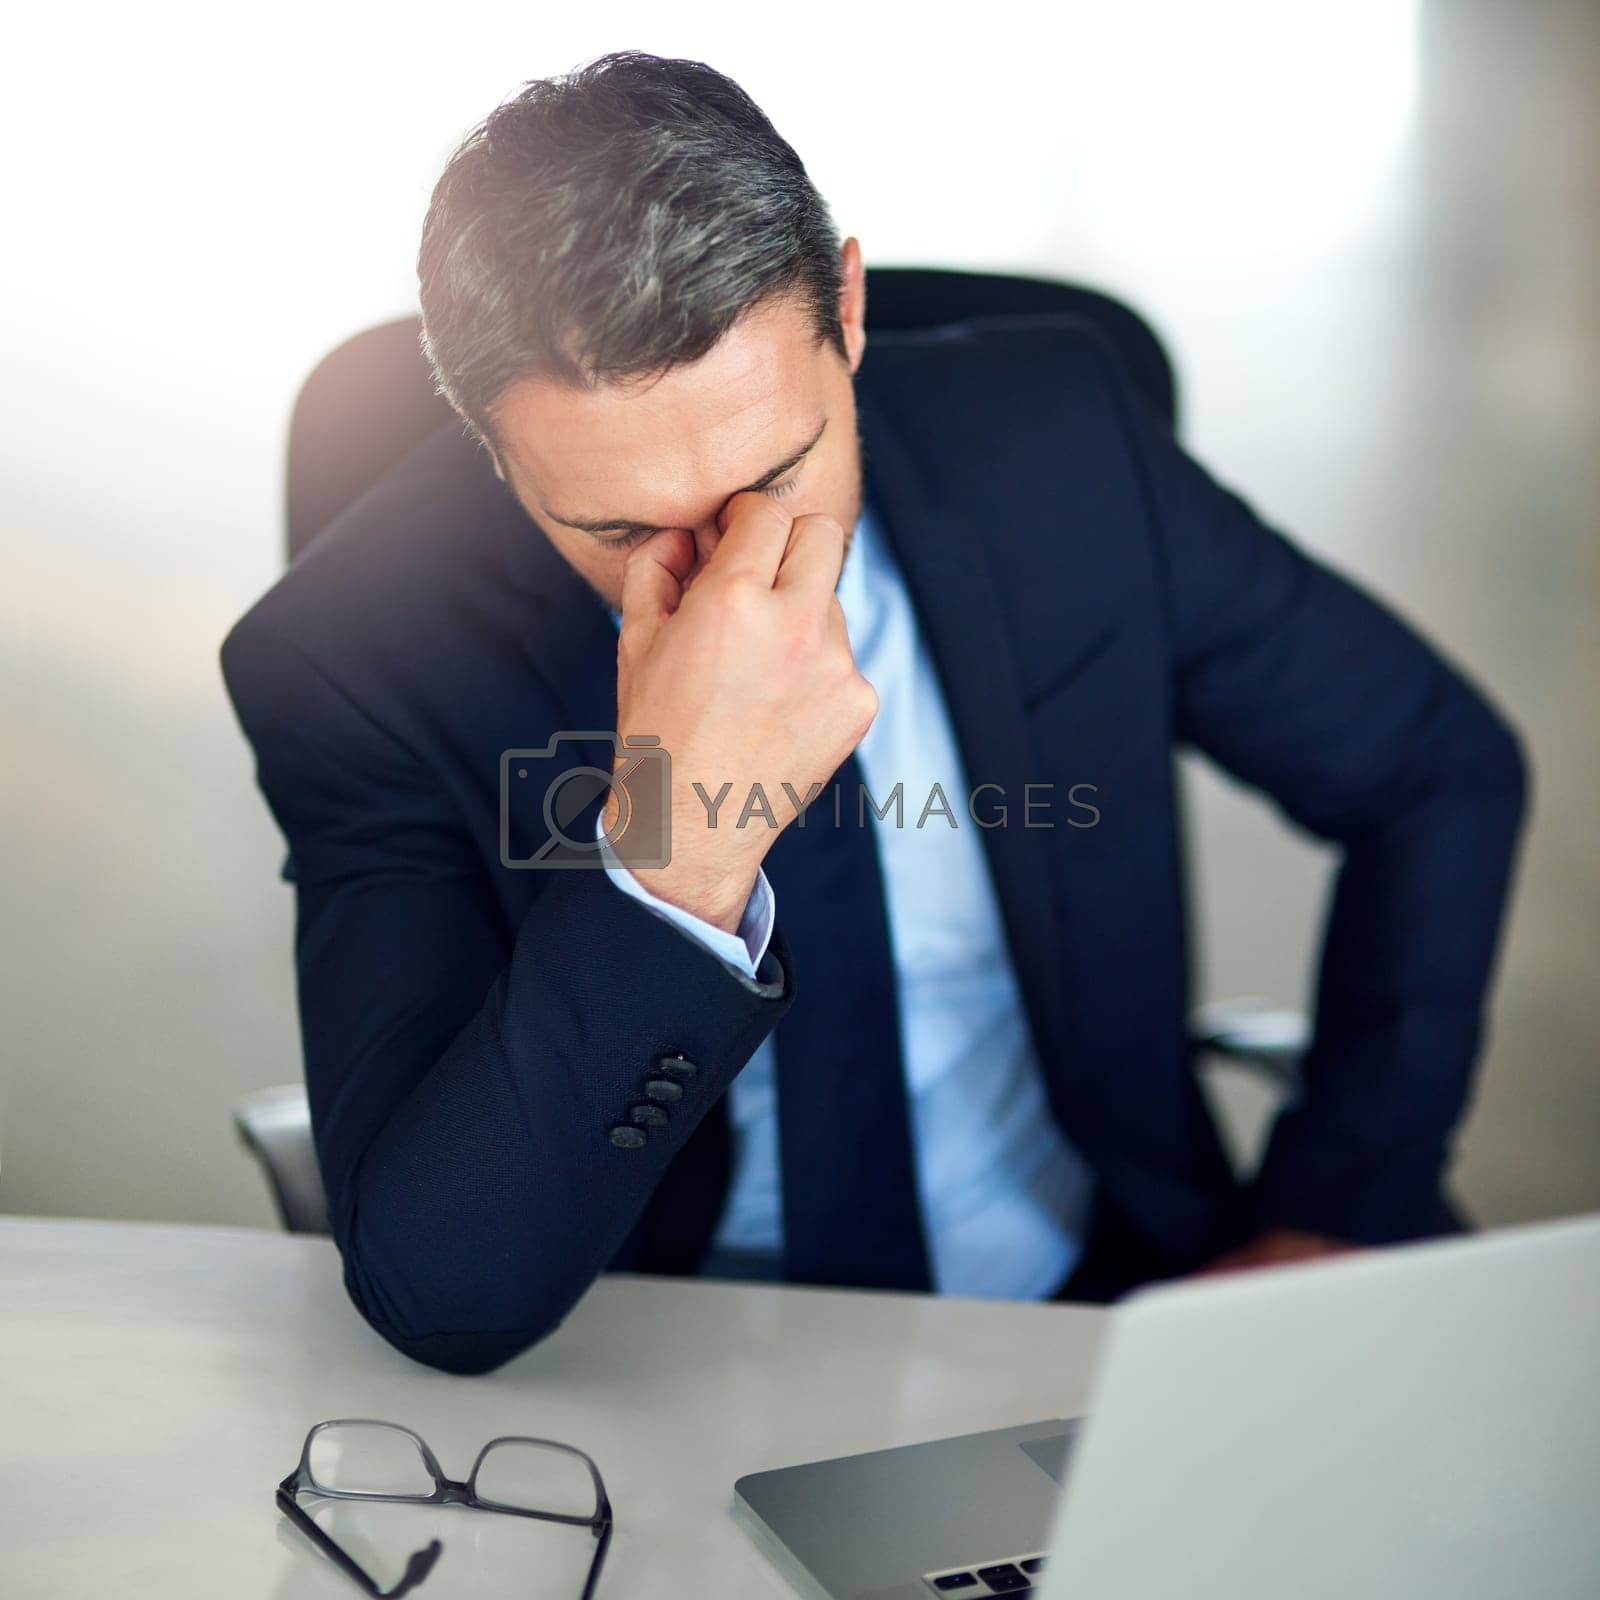 Royalty free image of Zero motivation. a businessman experiencing stress at the office. by YuriArcurs